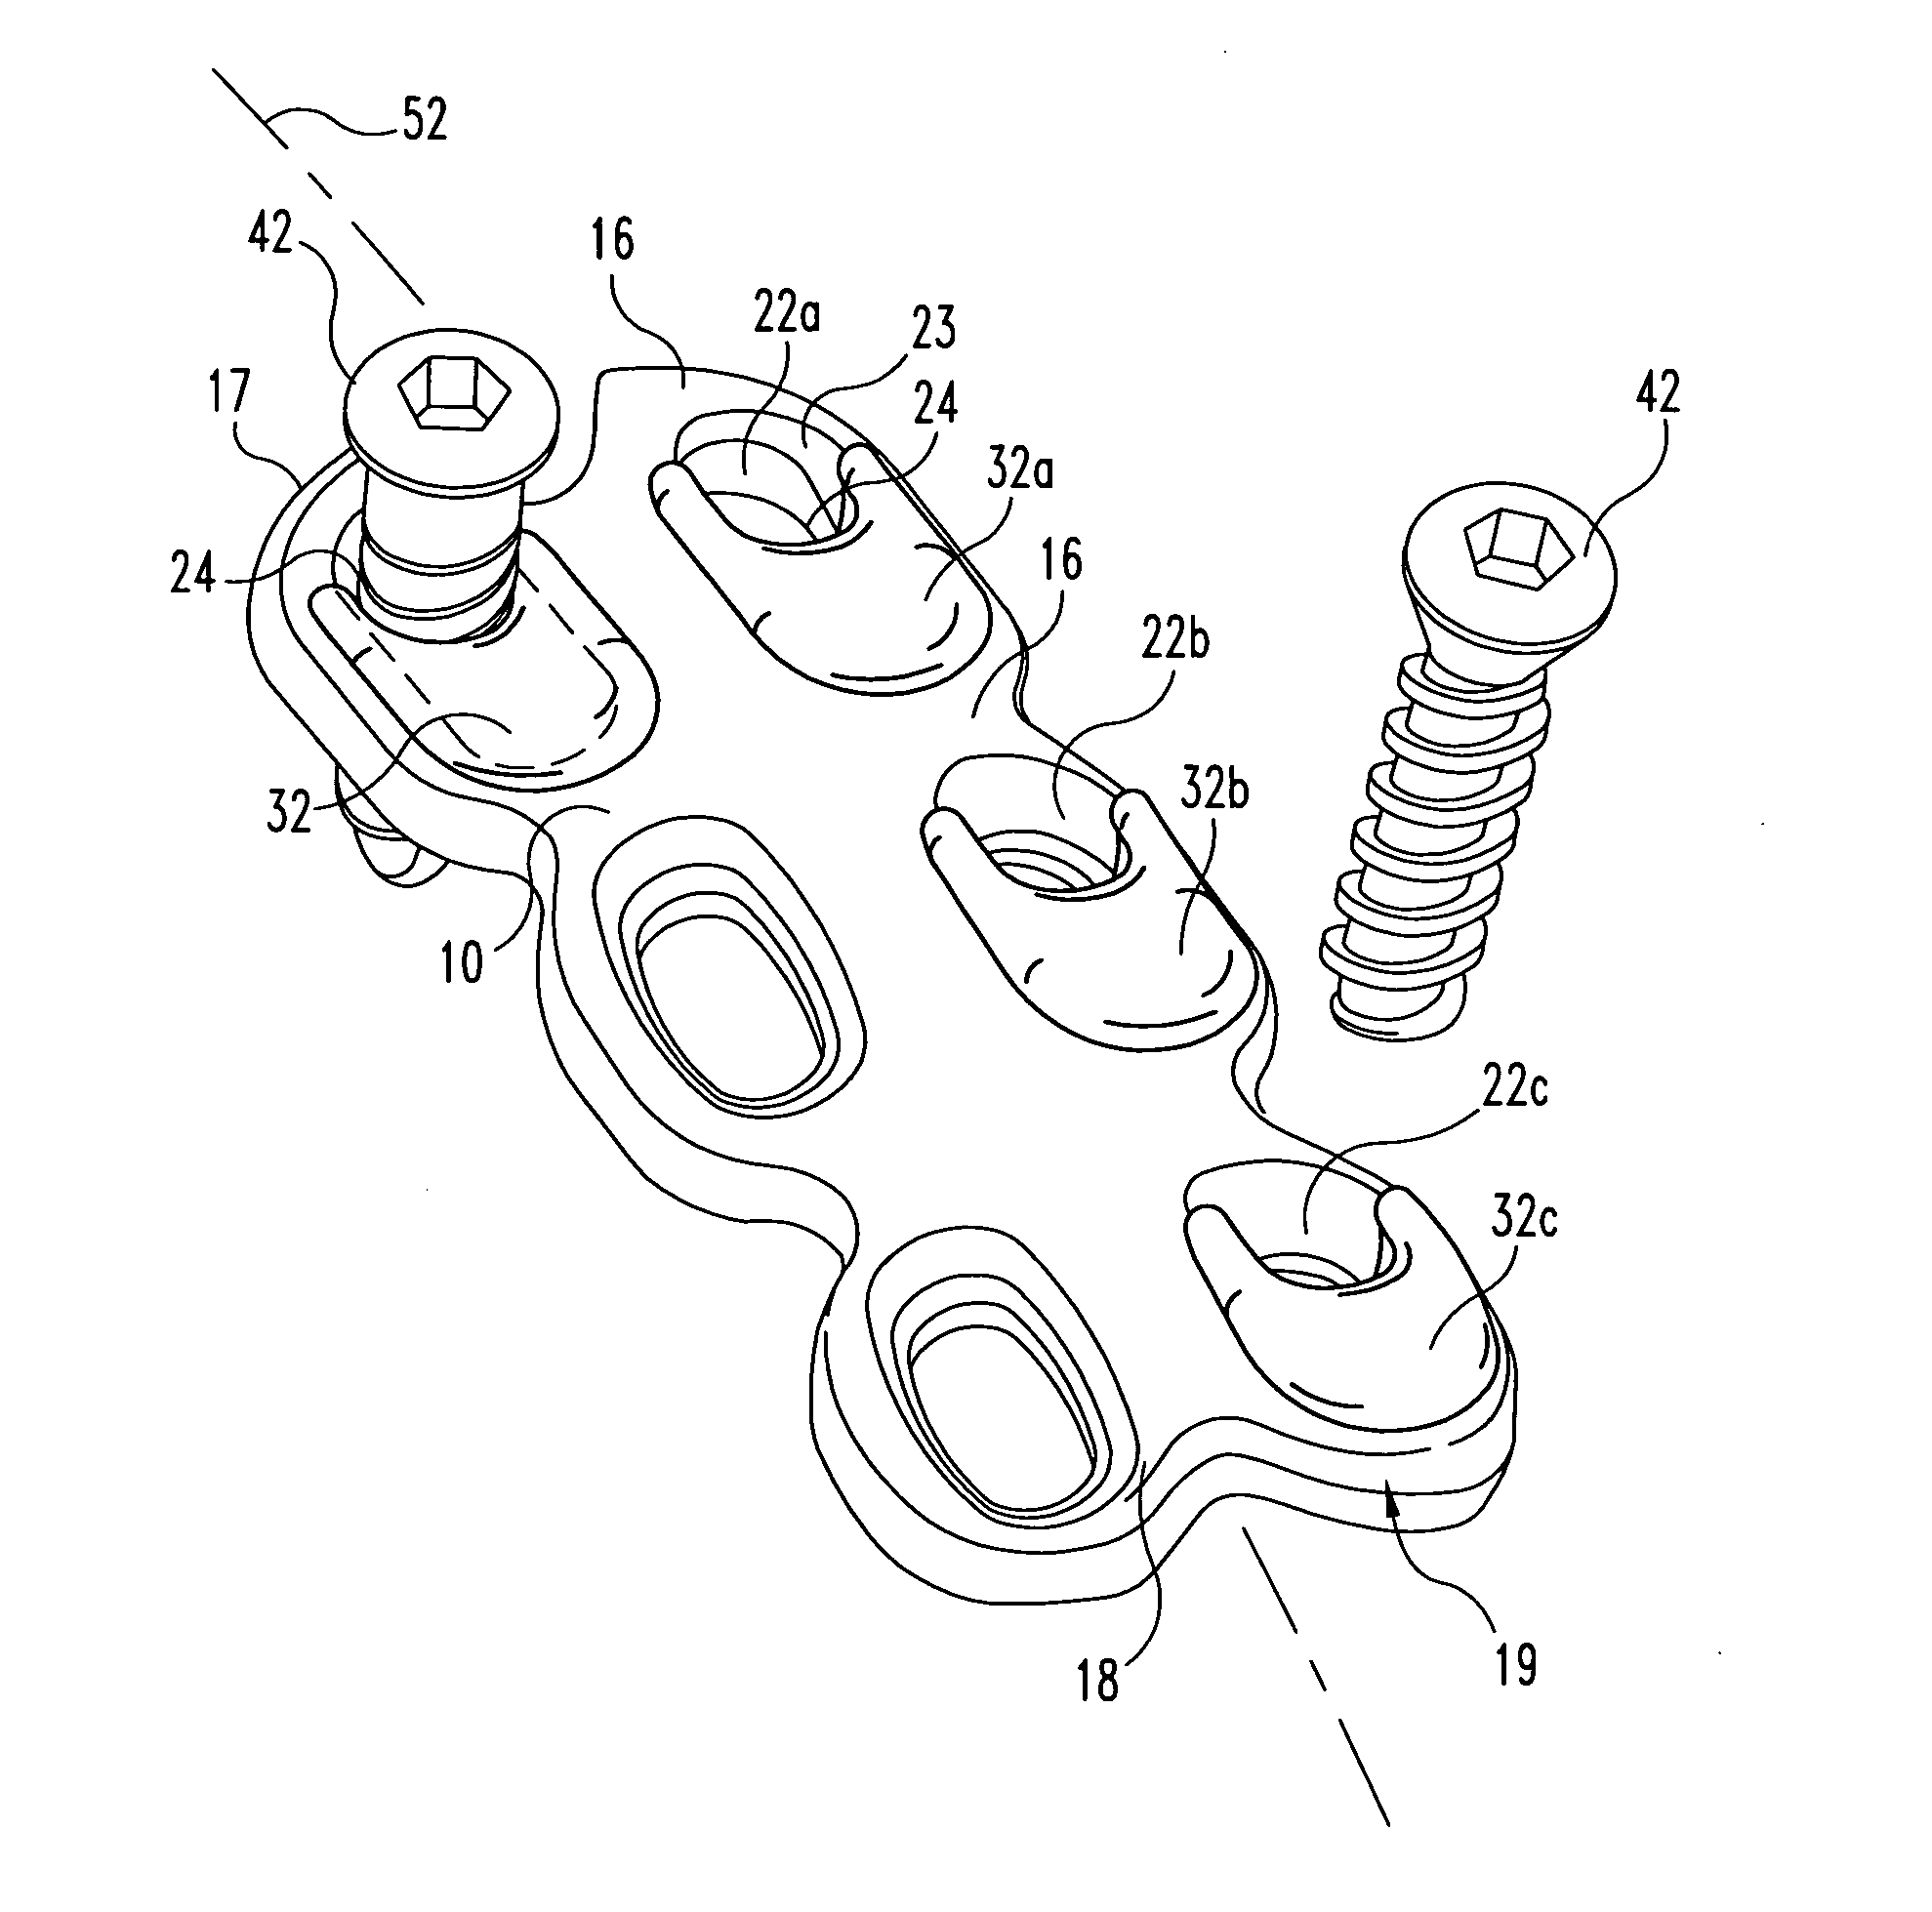 Apparatus and method for providing dynamizable translations to orthopedic implants